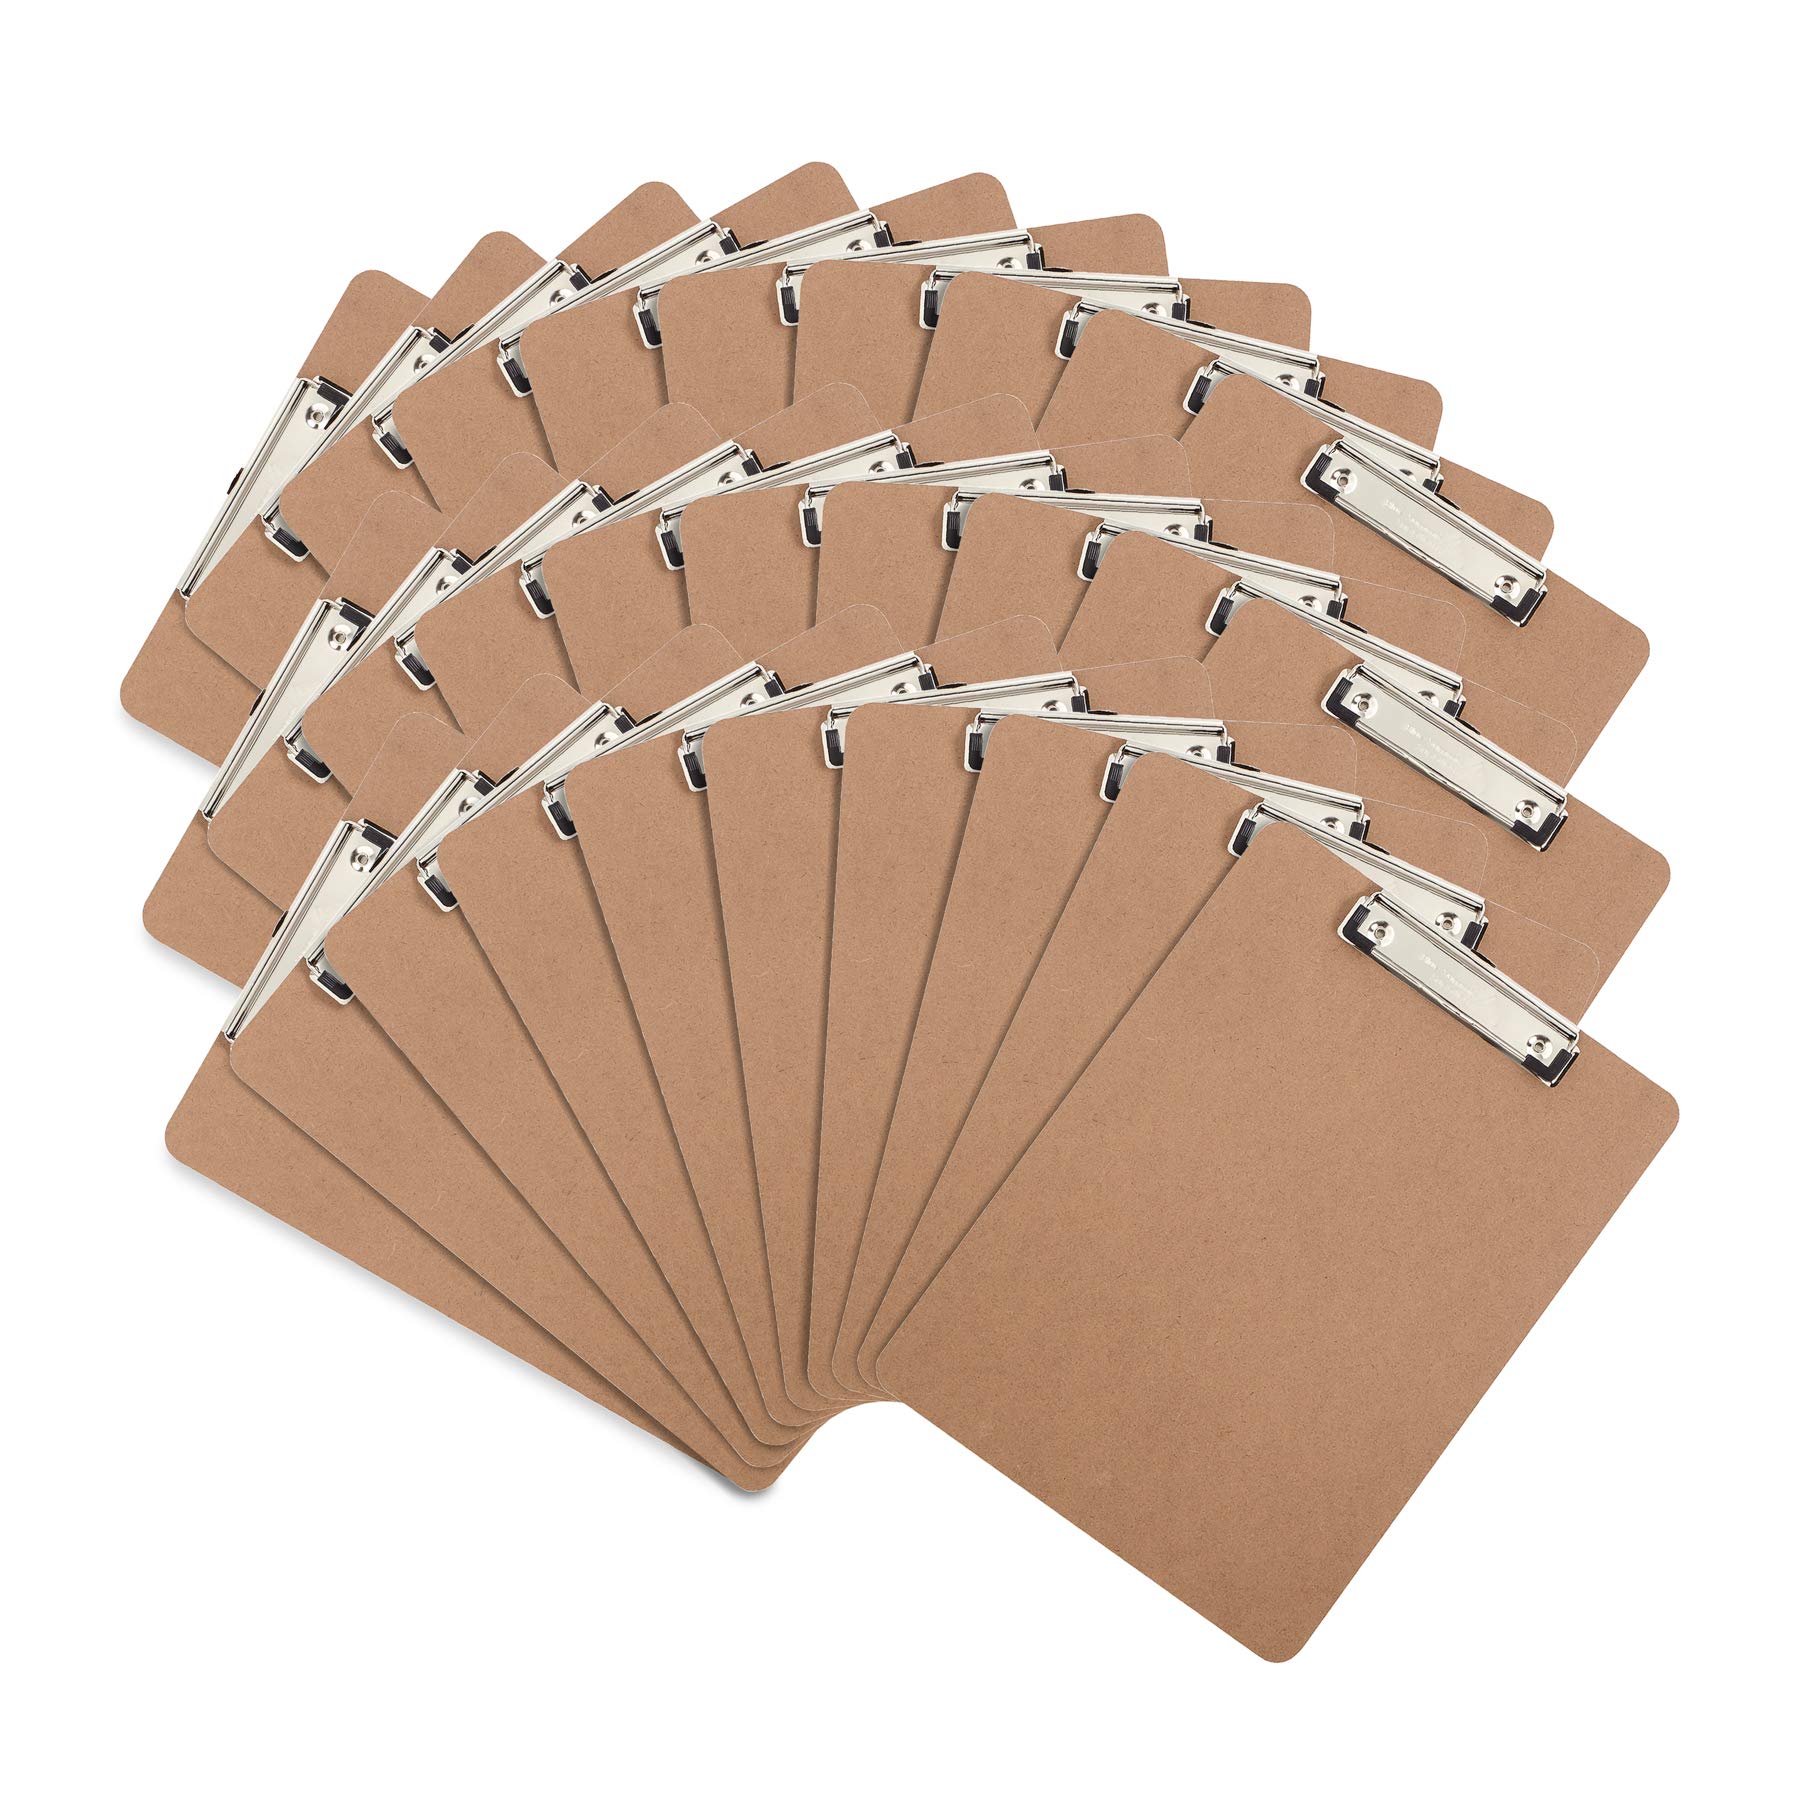 Book Cover 30 Hardboard Clipboards, Low Profile Clip, Designed for Classroom and Office Use, 30 Clip Boards